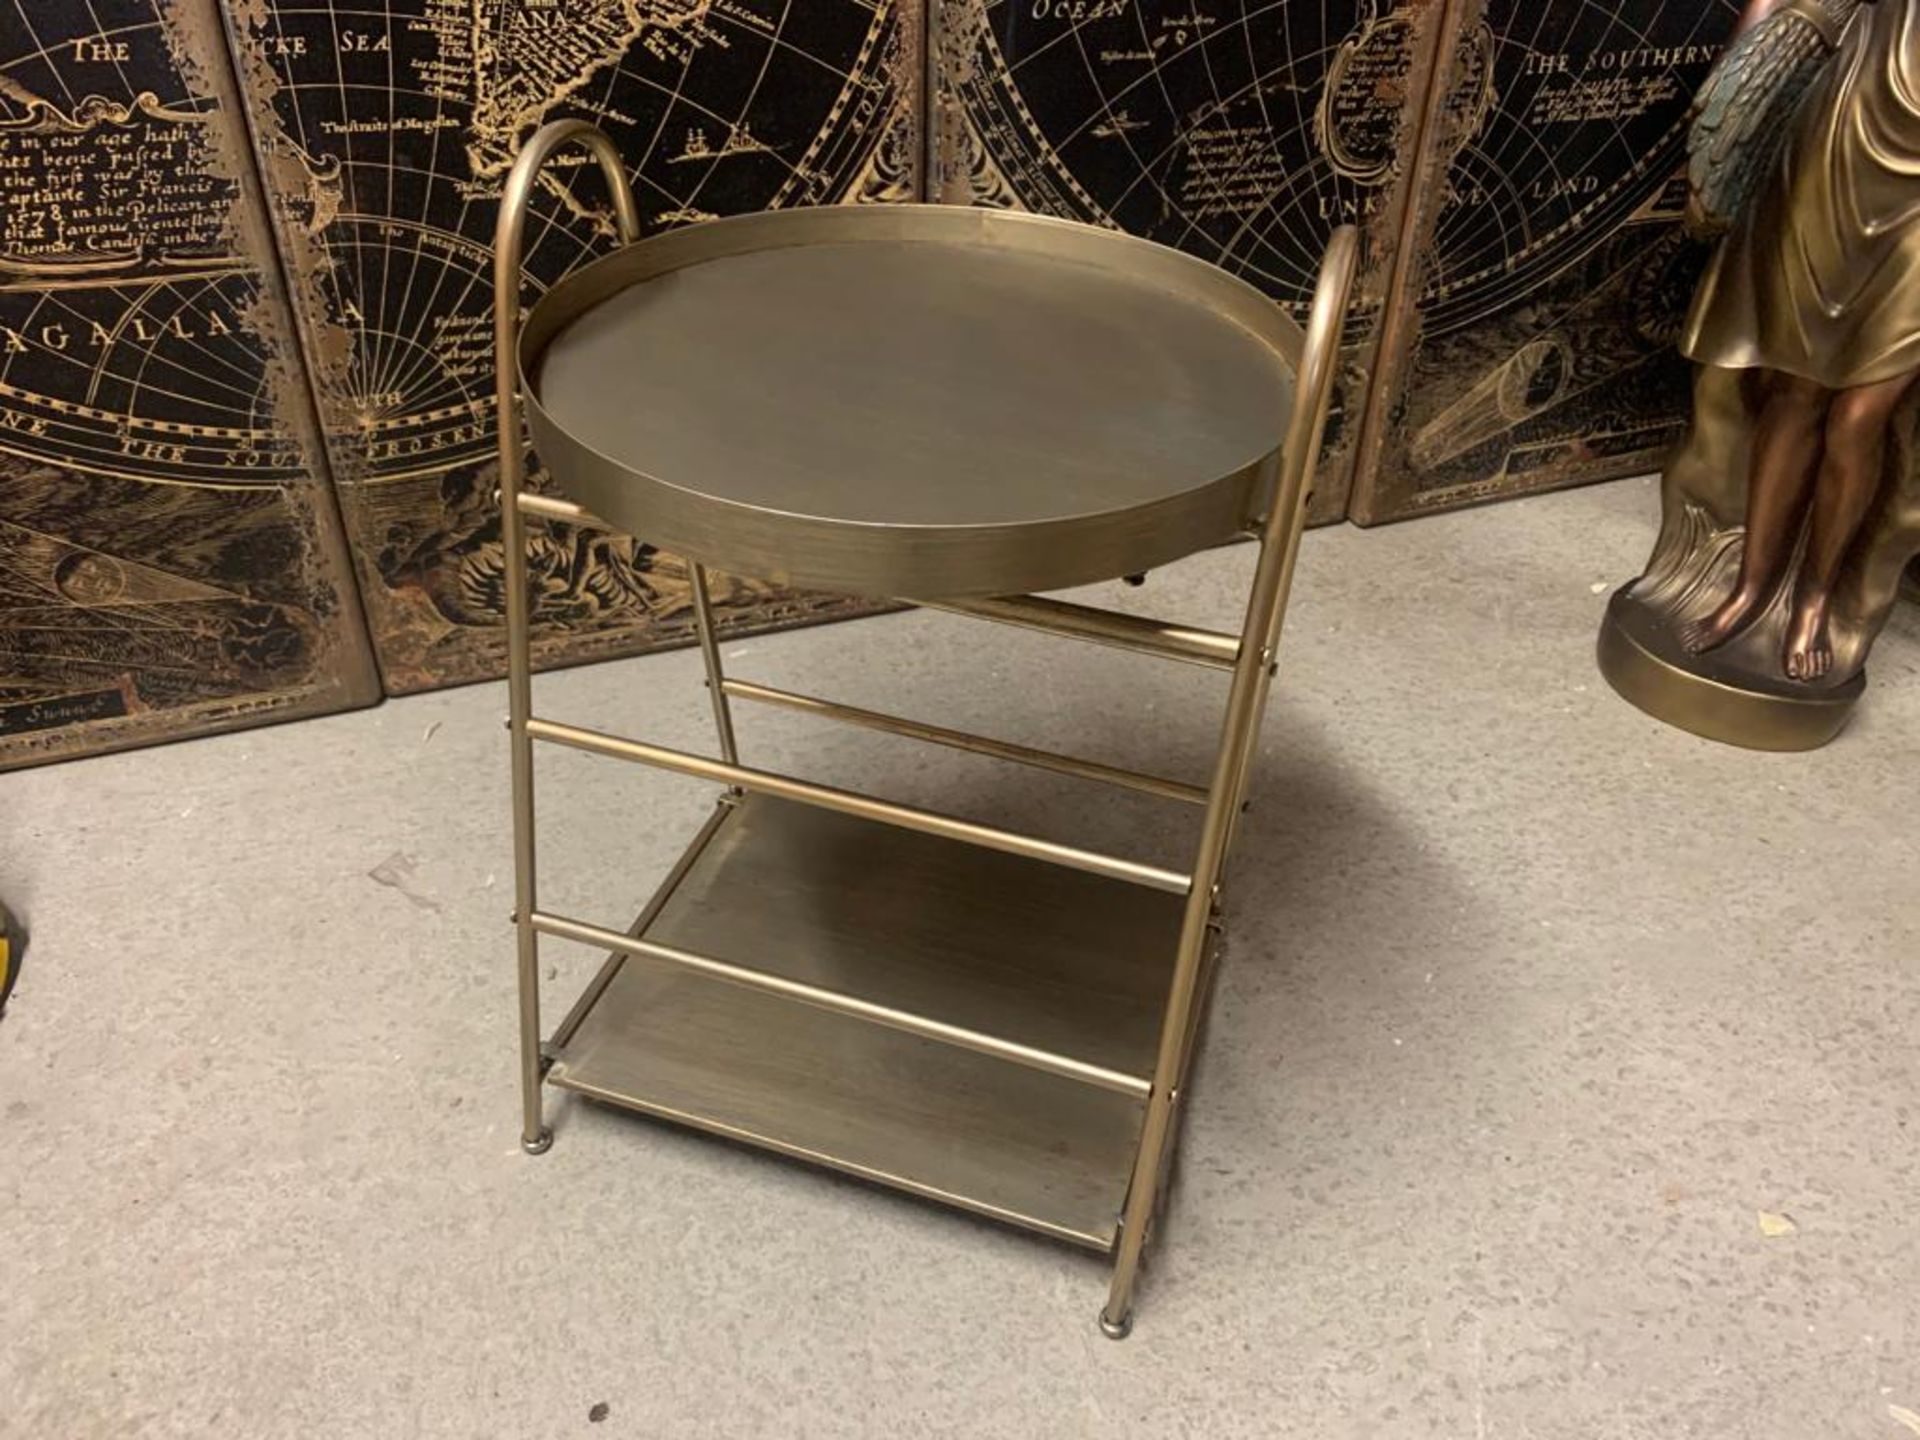 New Boxed Large Drinks Tray And Side Table In A Brass Finish (Approx 70cm) - Image 2 of 3